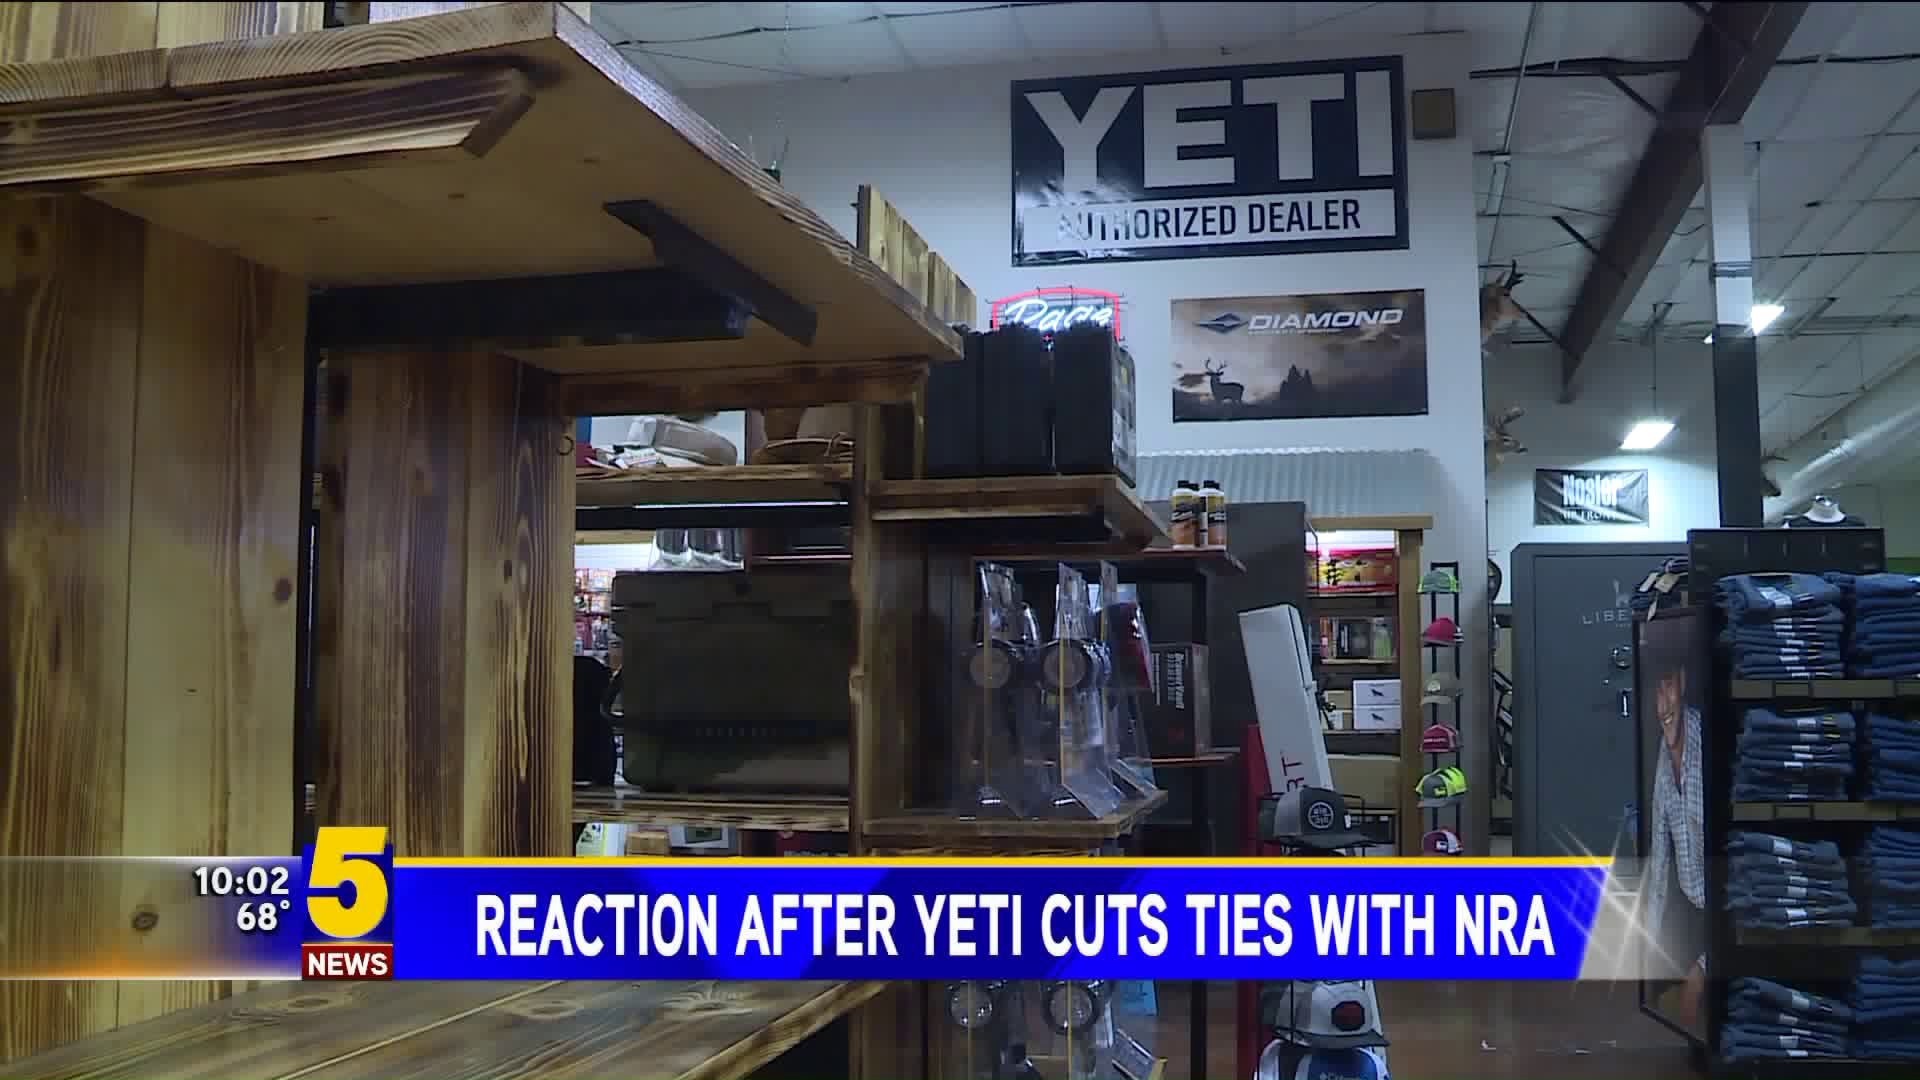 Local Store Responds To YETI, NRA Controversy